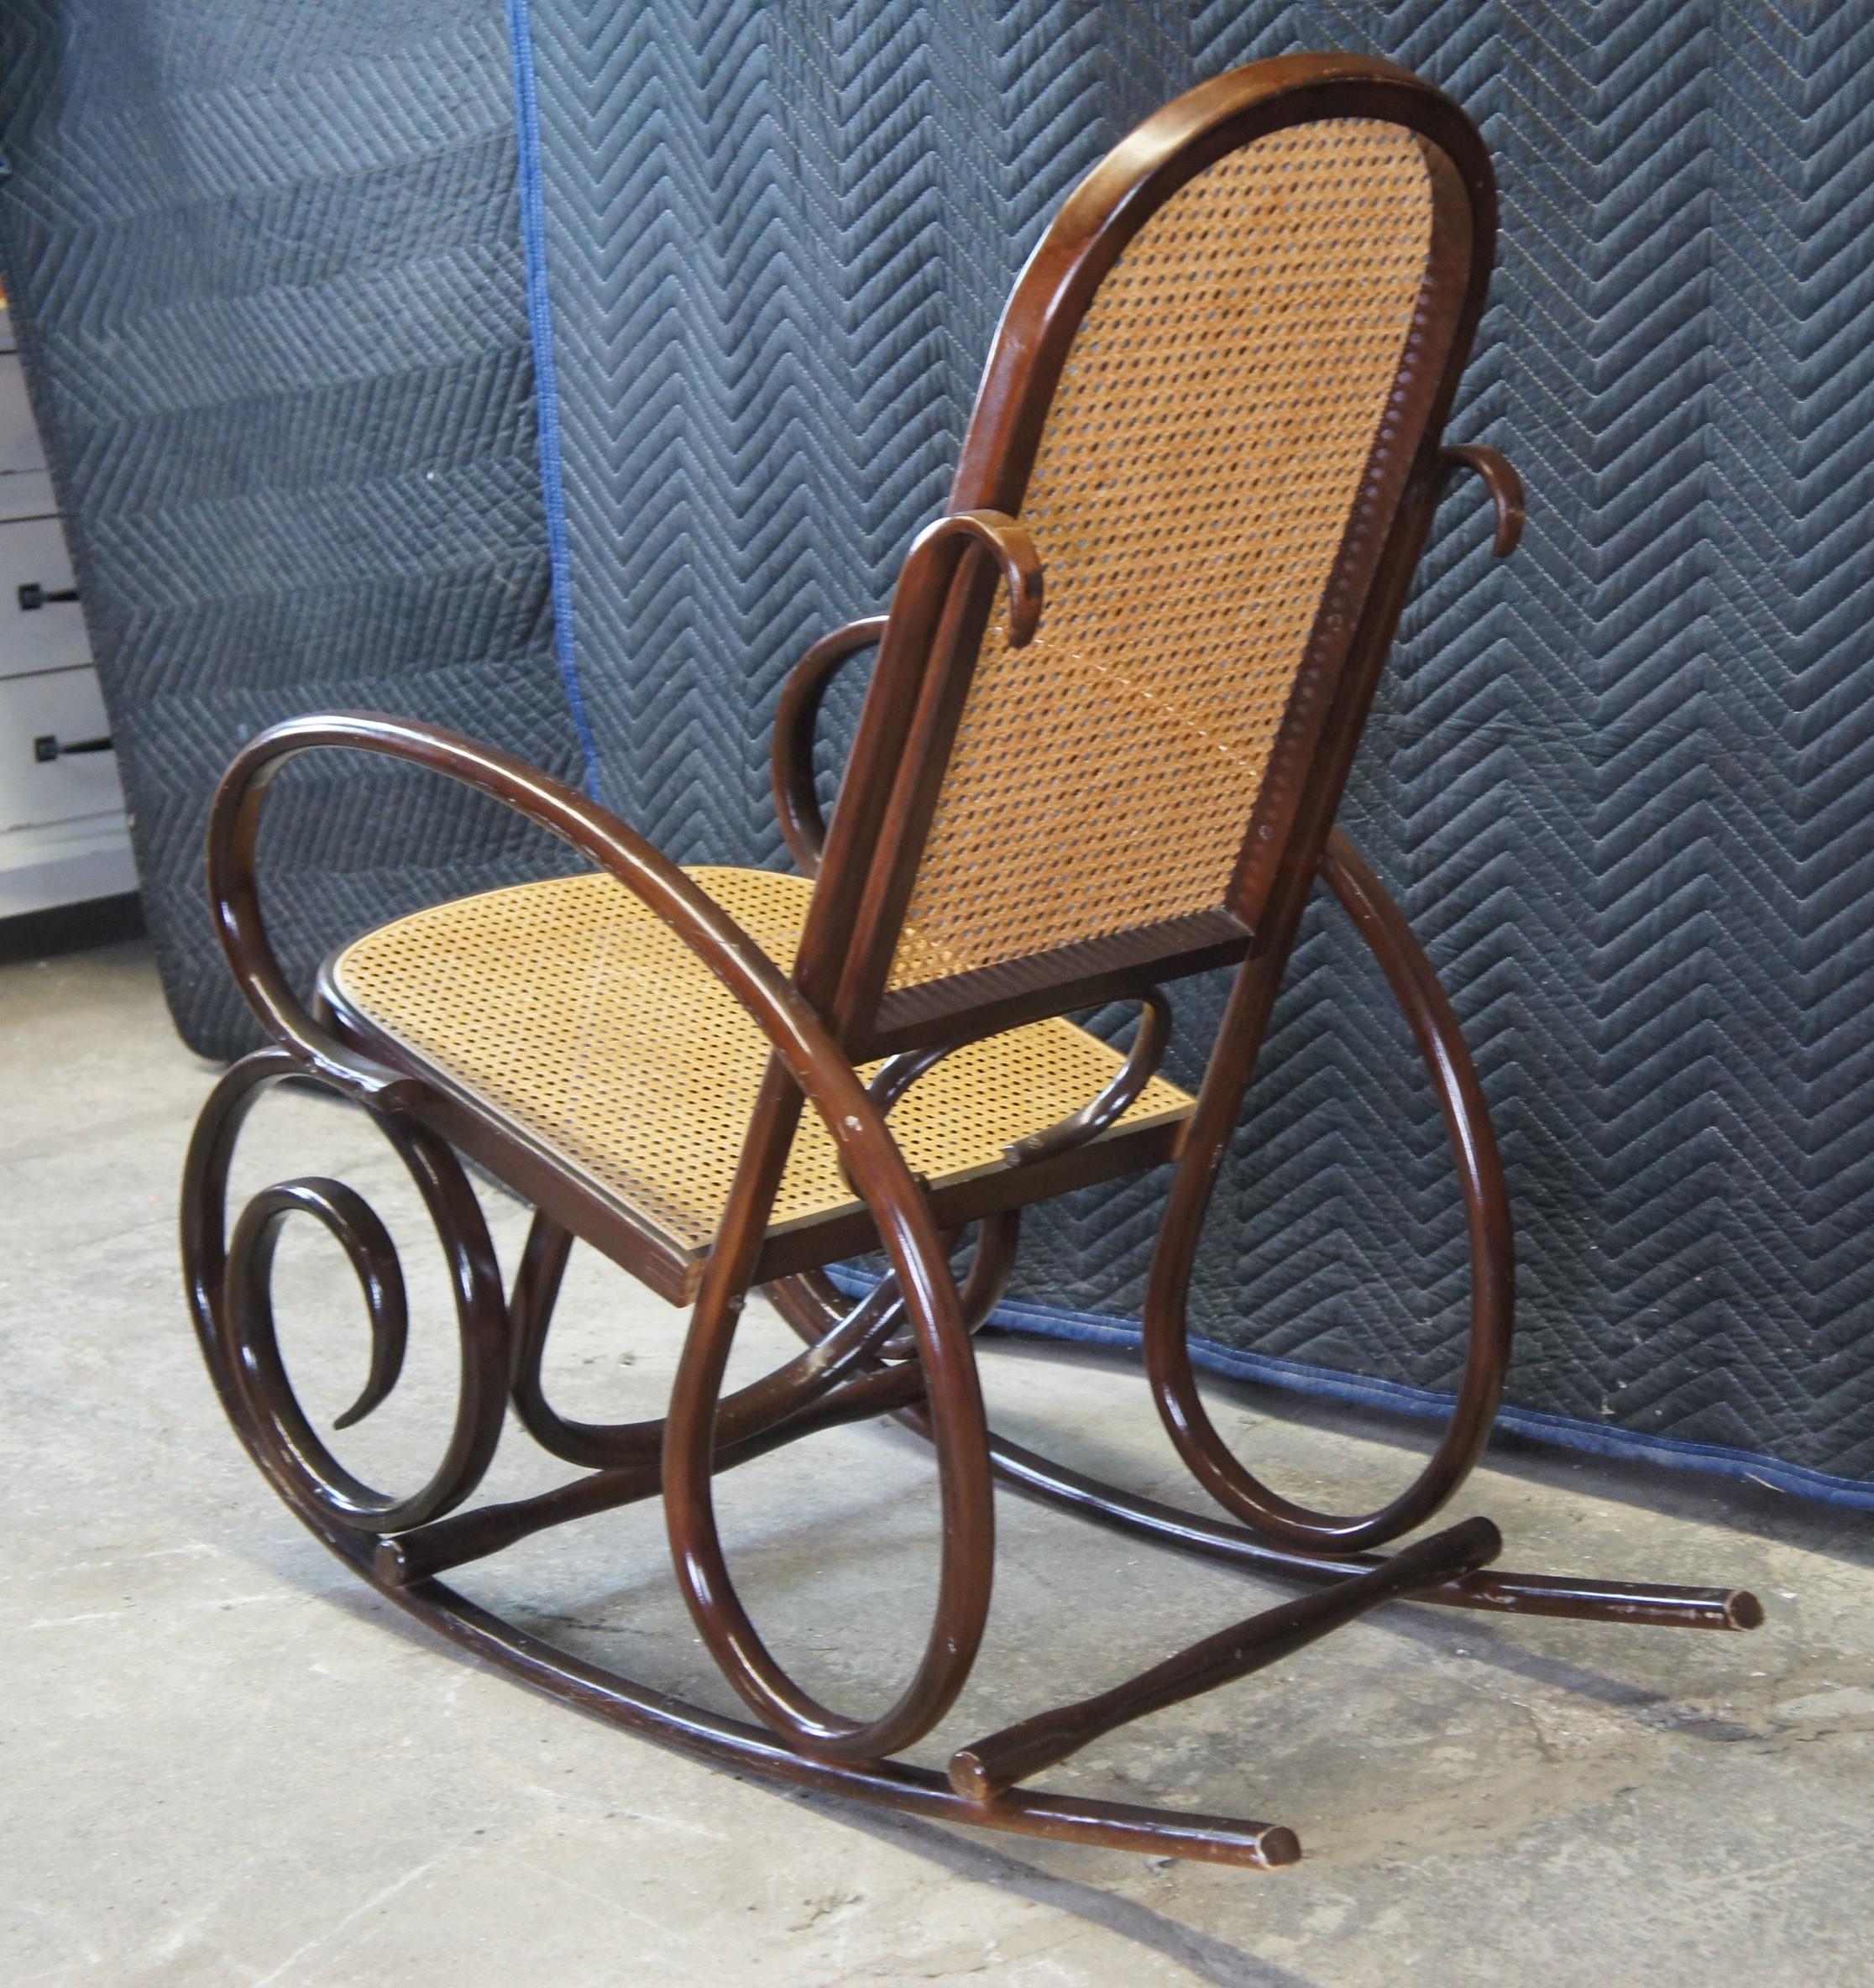 Iconic Thonet Style Bentwood Rocking Chair Natural Cane Rattan Seat Back Rocker In Good Condition For Sale In Dayton, OH